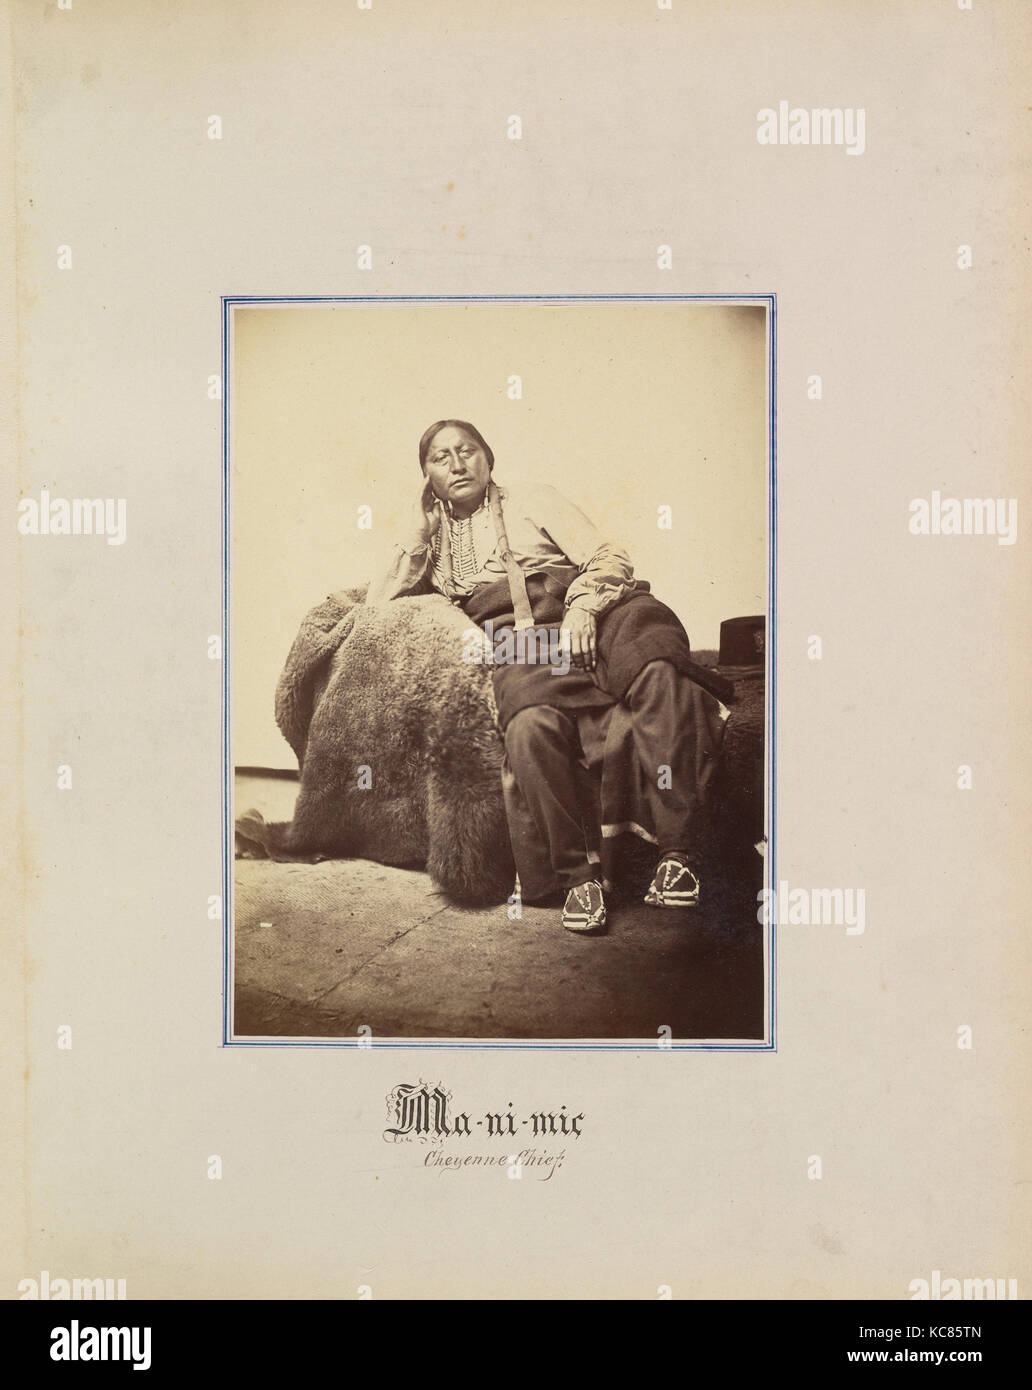 Ma-ni-mic, chef Cheyenne, William Stinson Soule, 1869-74 Banque D'Images